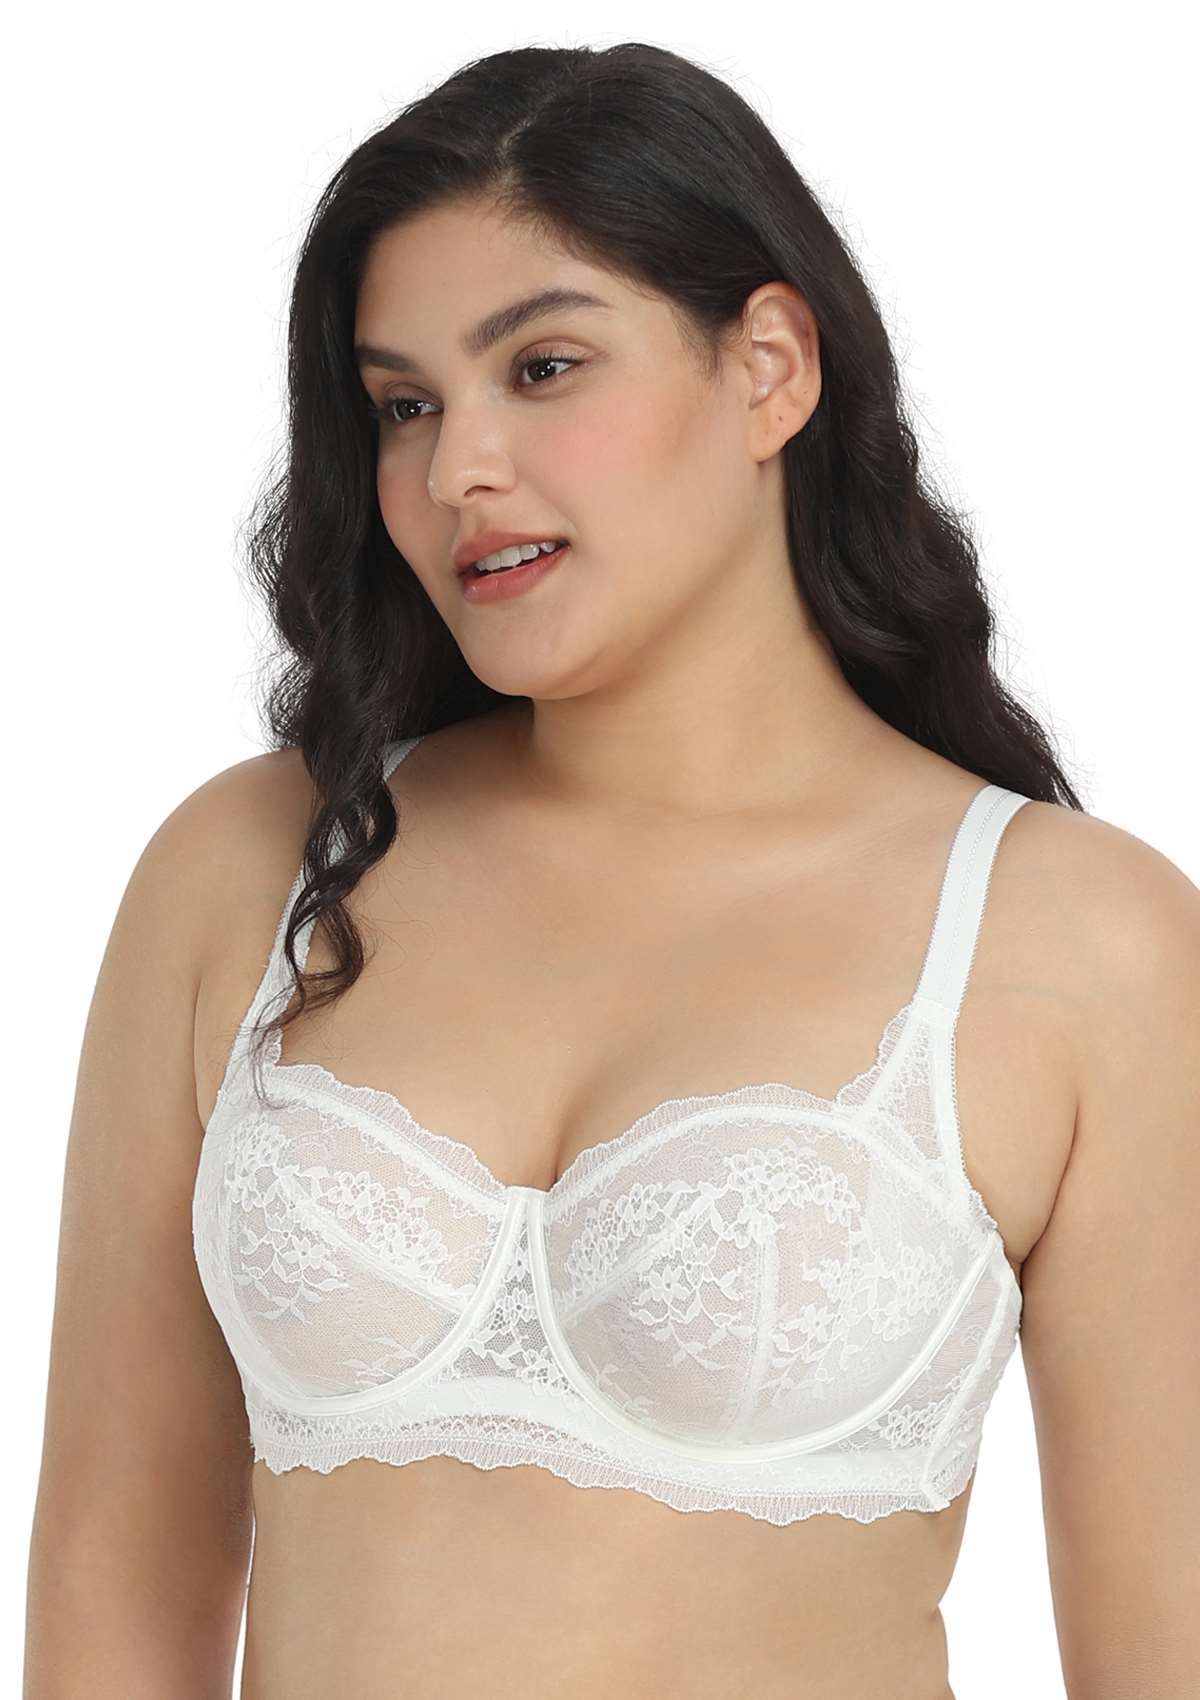 HSIA I Do Floral Lace Bridal Balconette Beautiful Bra For Special Day - Burgundy / 34 / DD/E